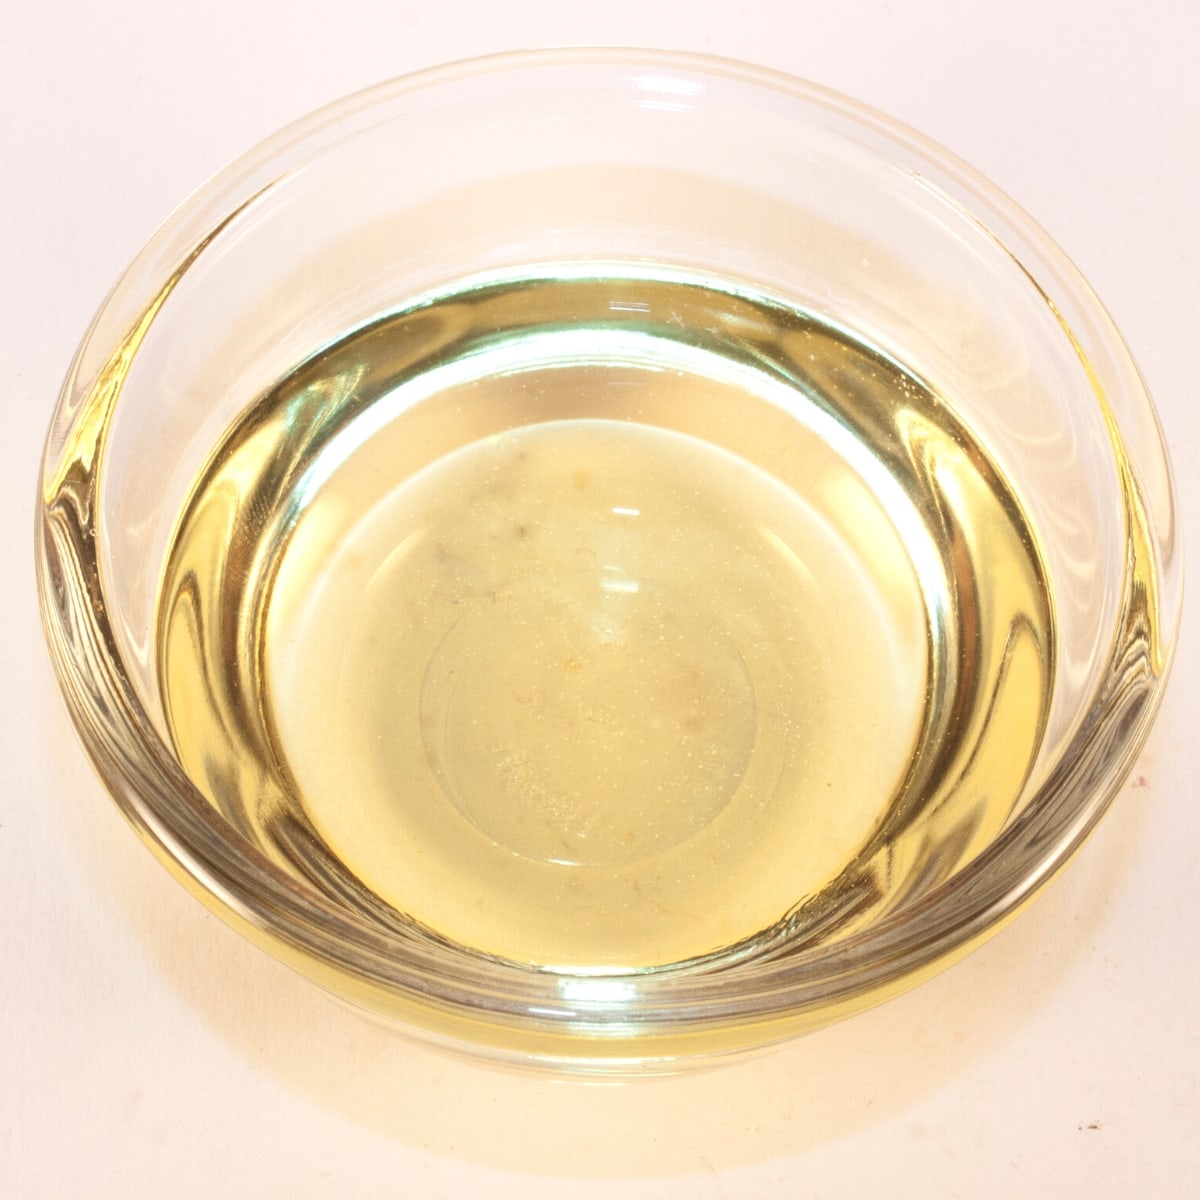 A clear glass bowl filled with white wine vinegar.